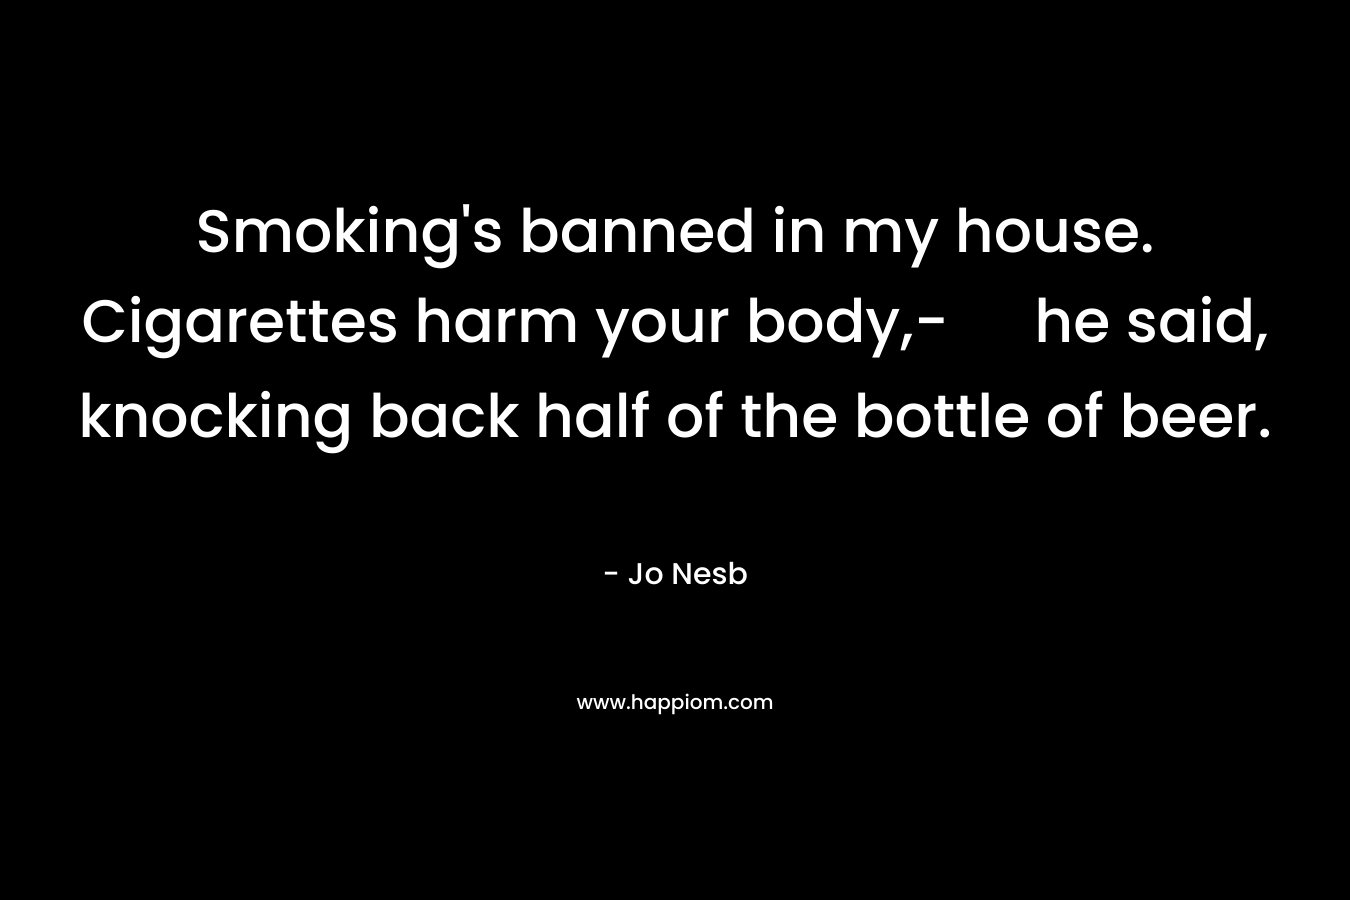 Smoking’s banned in my house. Cigarettes harm your body,- he said, knocking back half of the bottle of beer. – Jo Nesb